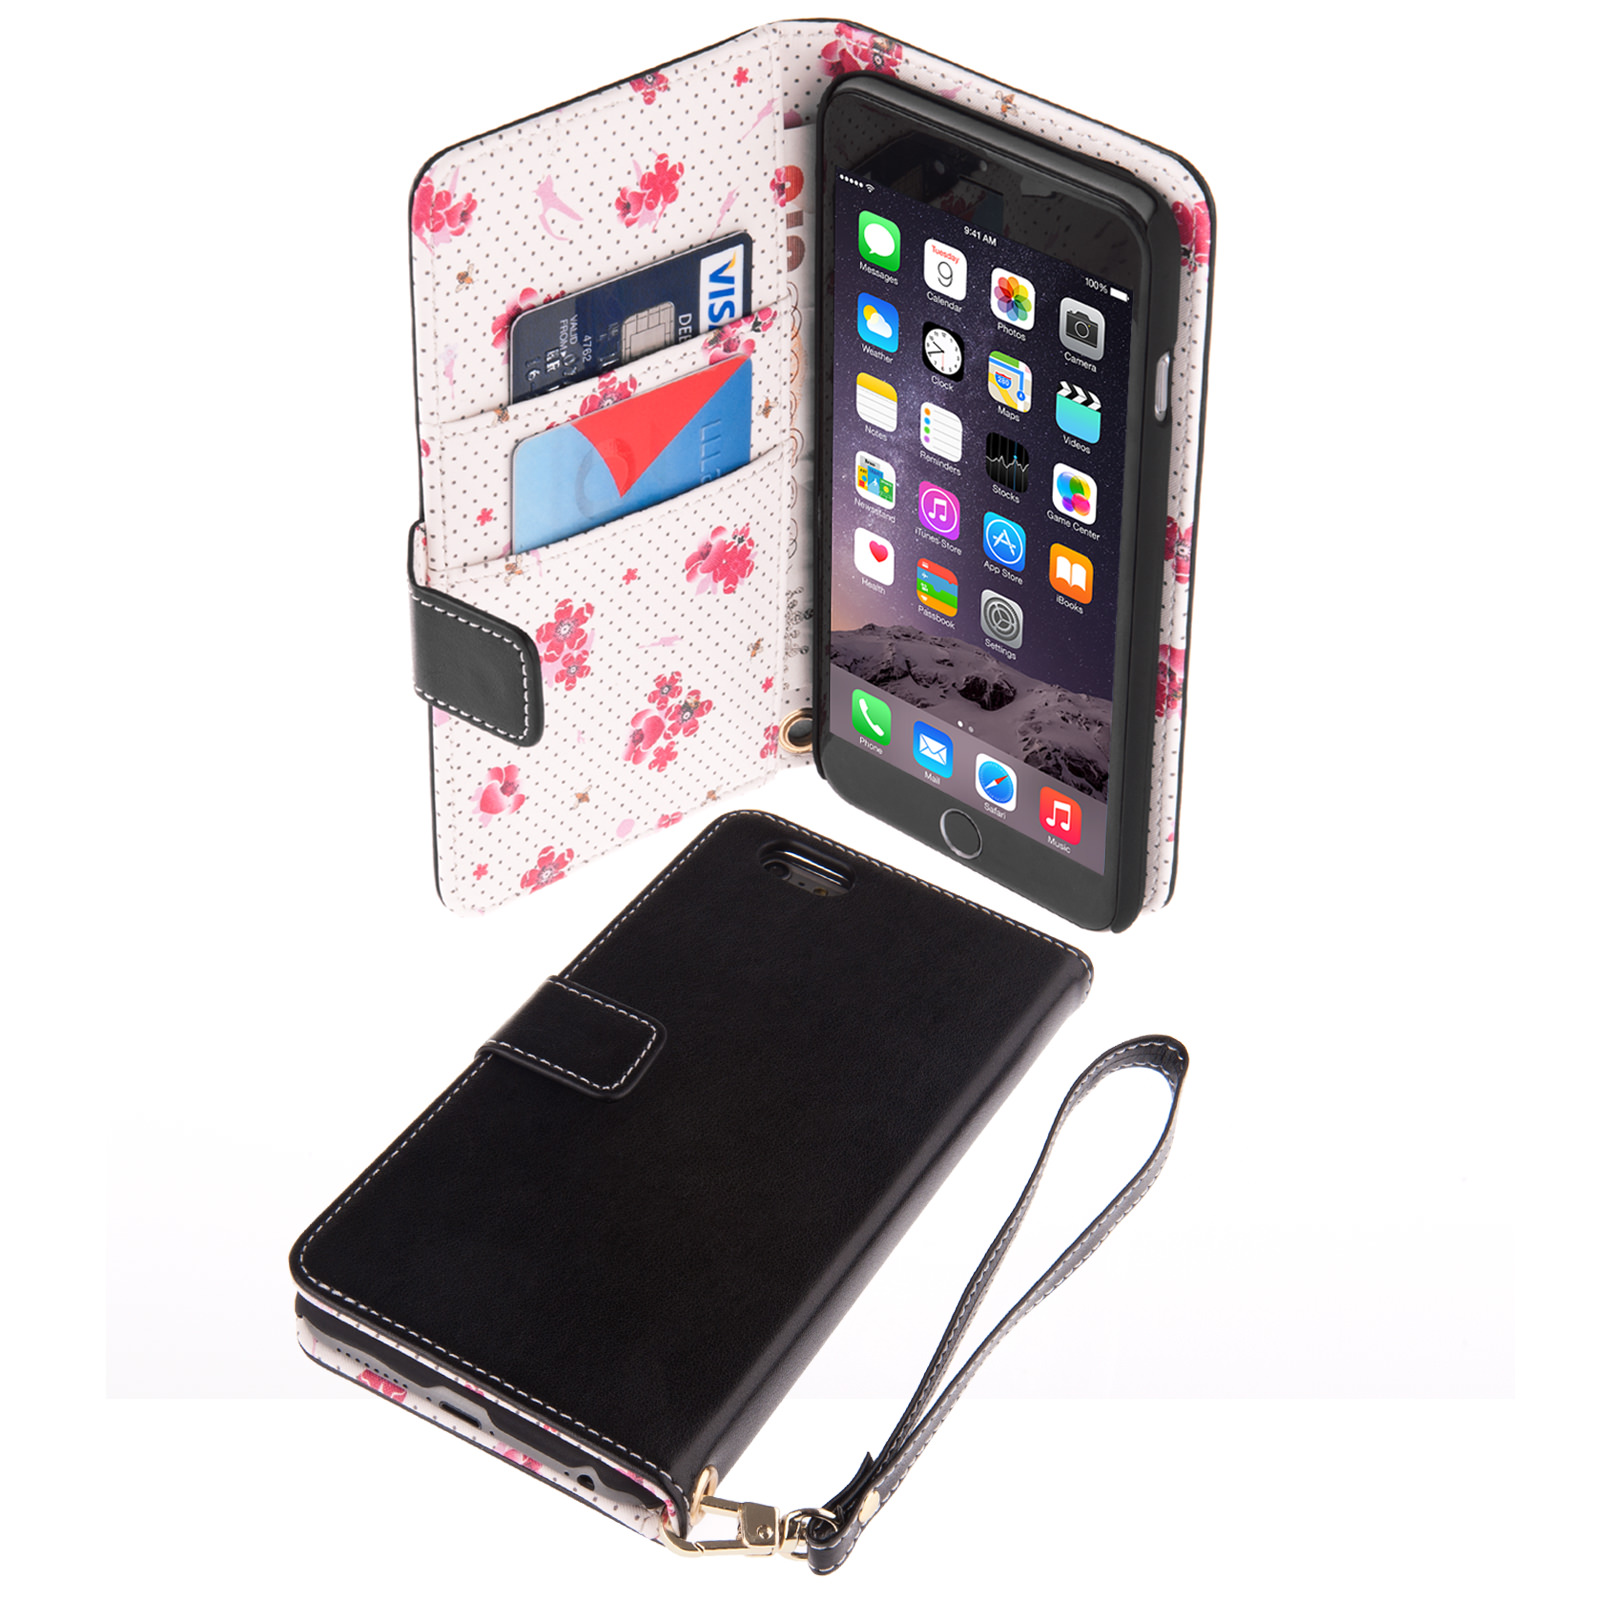 Caseflex iPhone 6 Plus and 6s Plus Leather-Effect Wallet Case – Black with Floral Lining